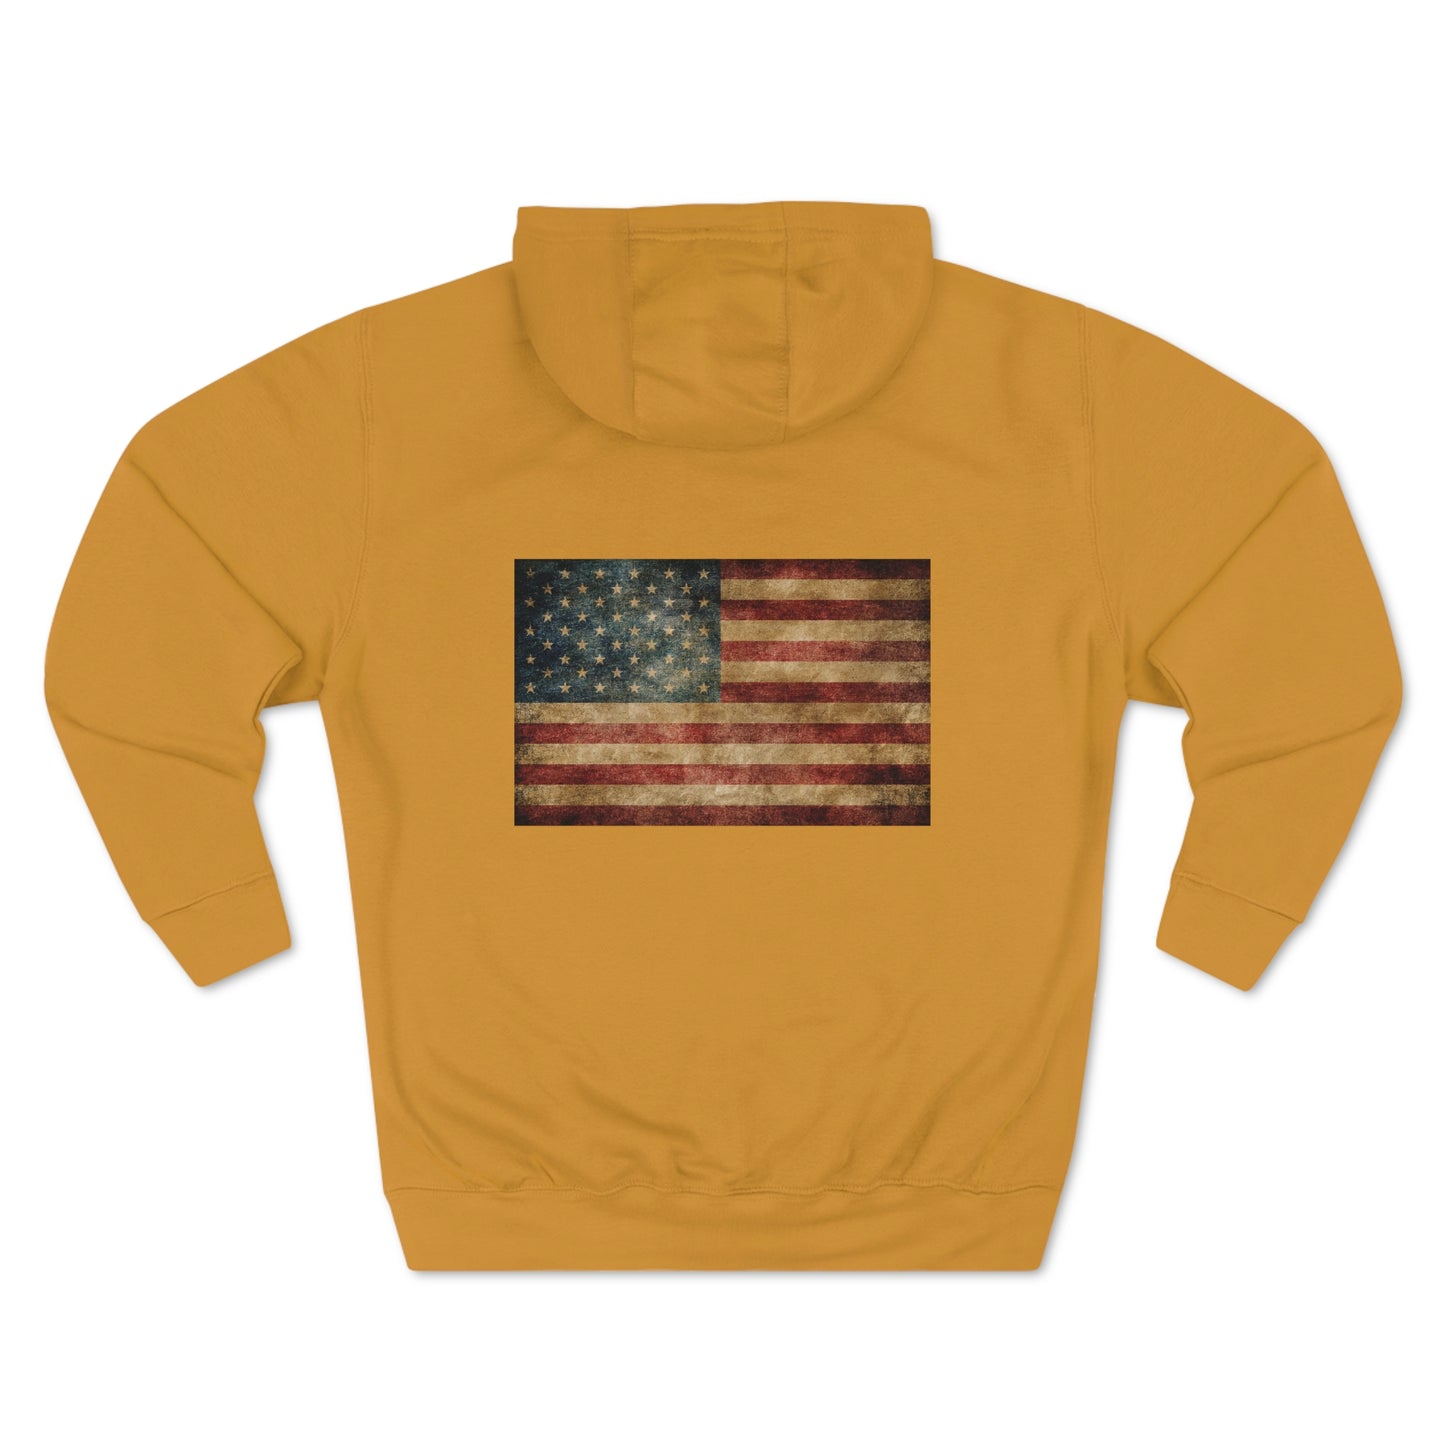 Stay Cool Unisex Premium Pullover Hoodie with American Flag and Dog Print